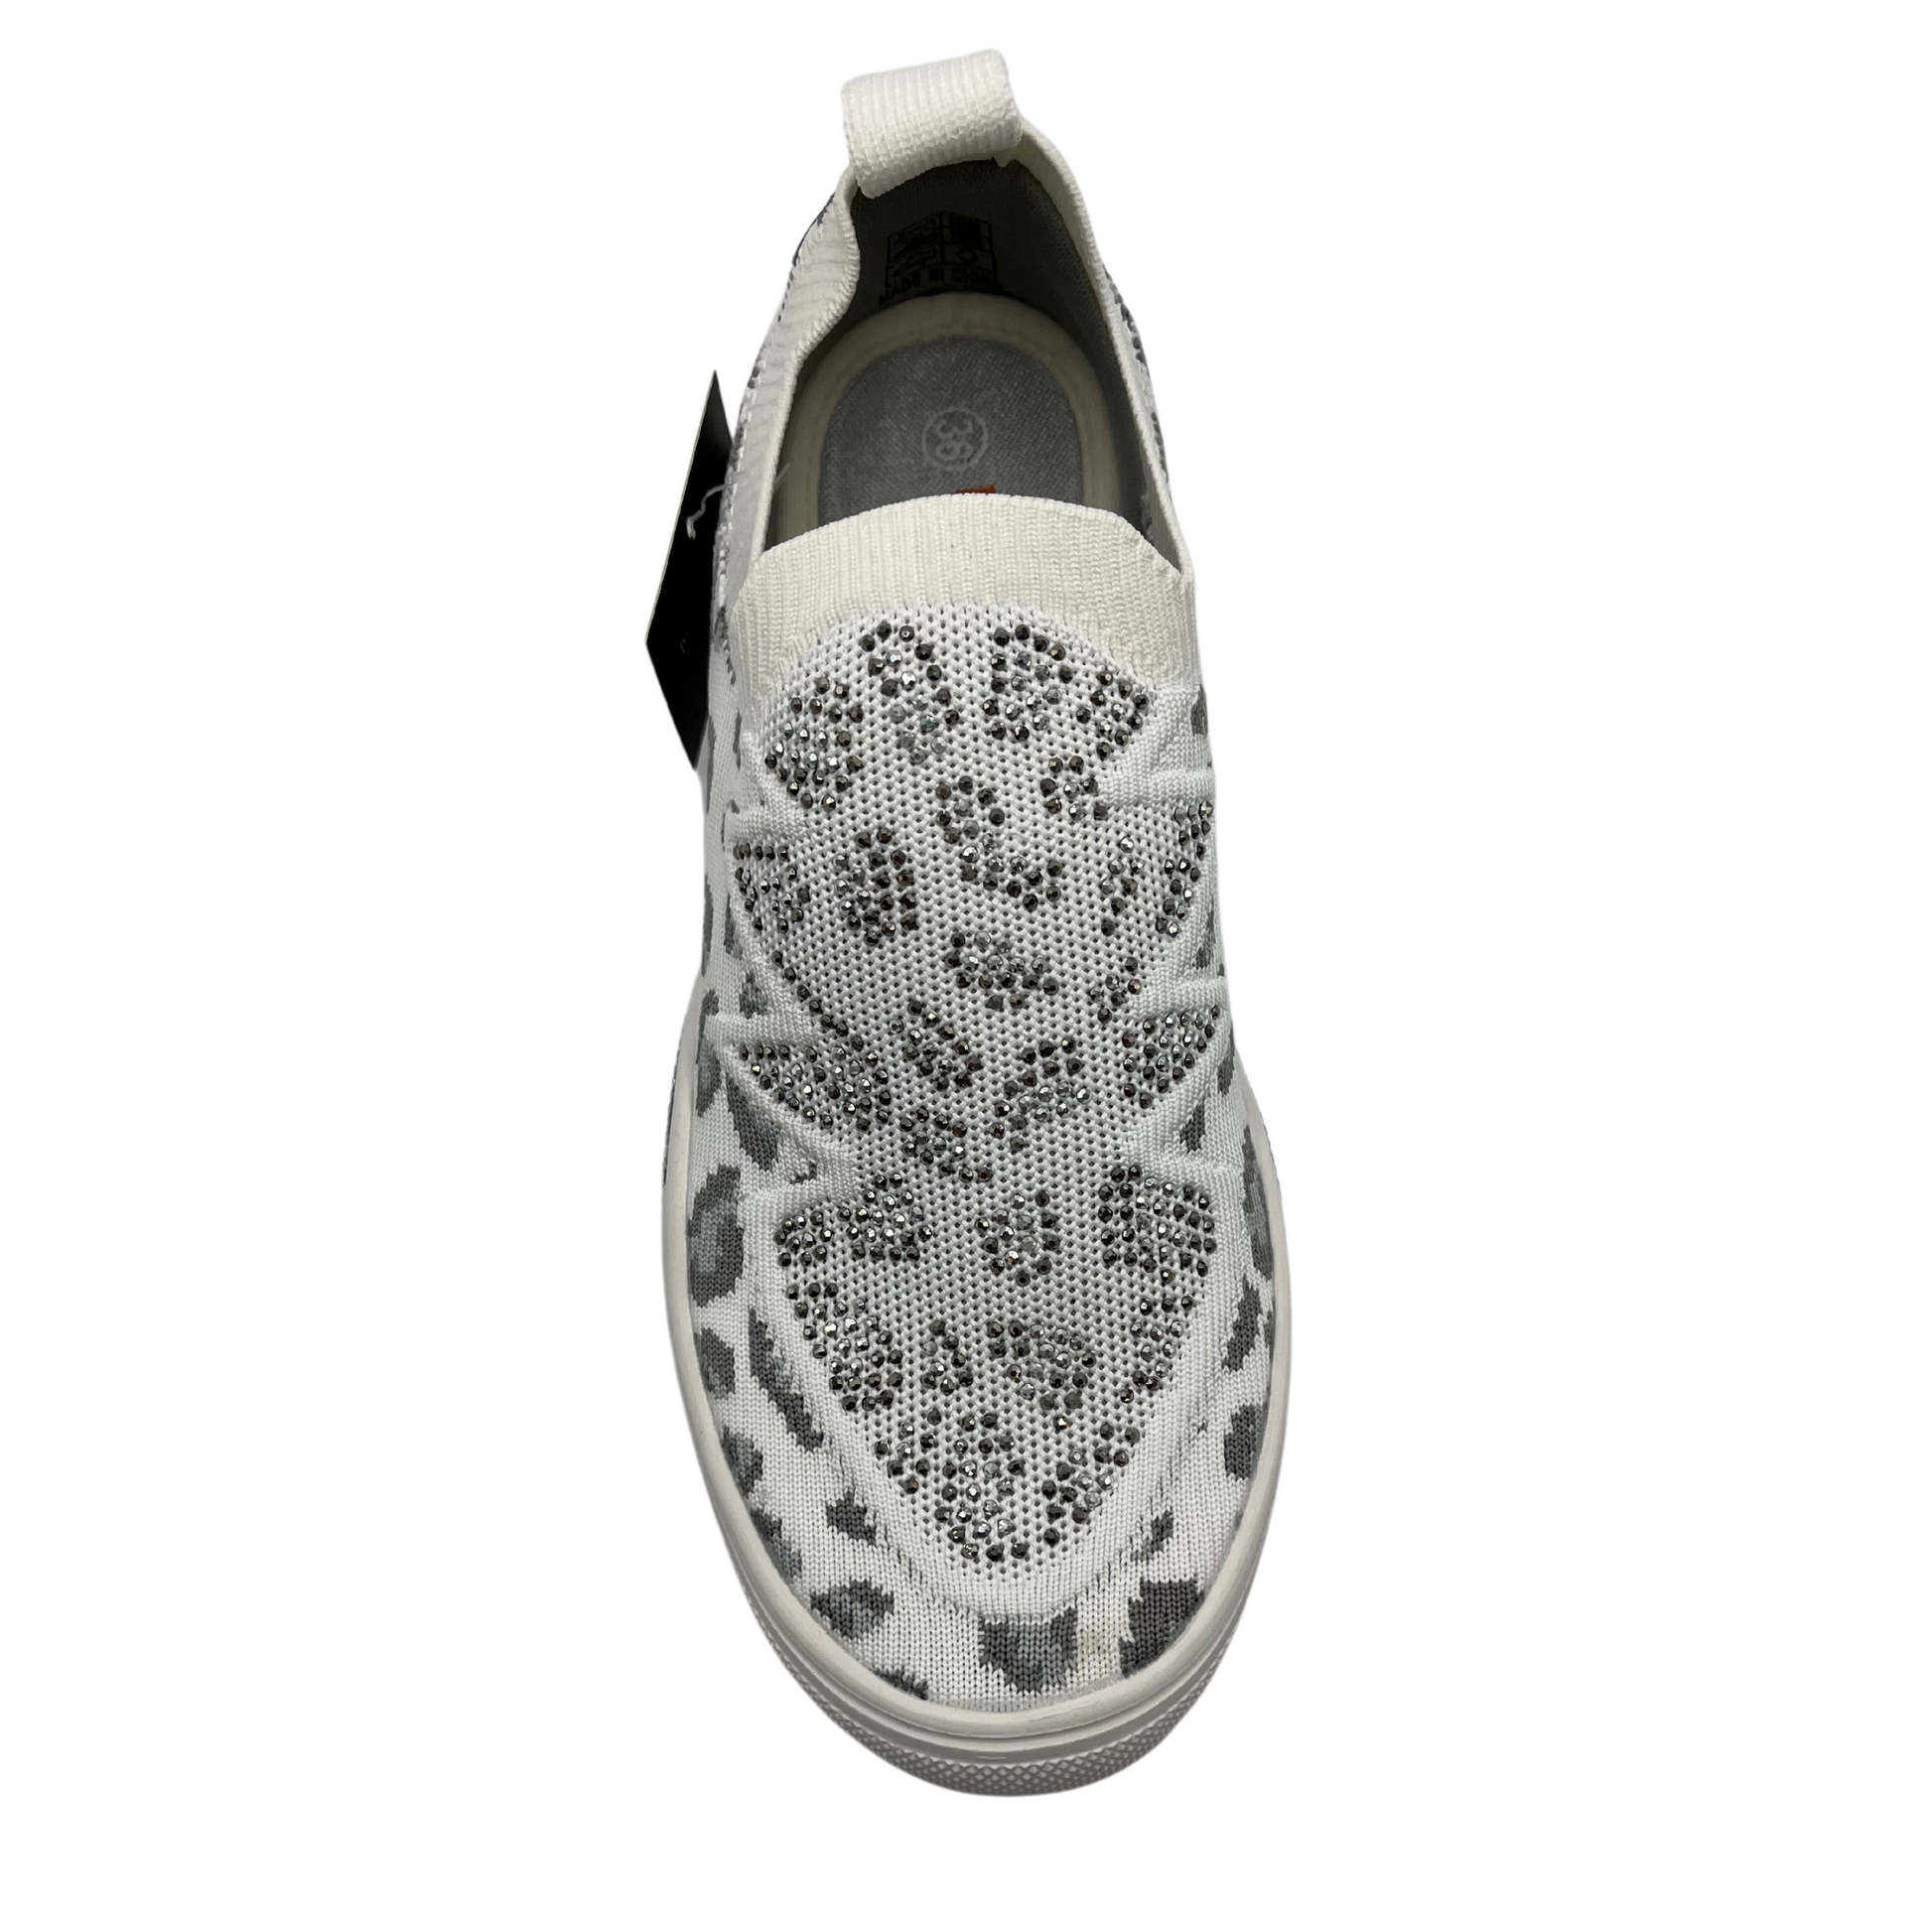 Top view of a slip on style sneaker in a fun leopard print with silver crystal accents. Shown in white